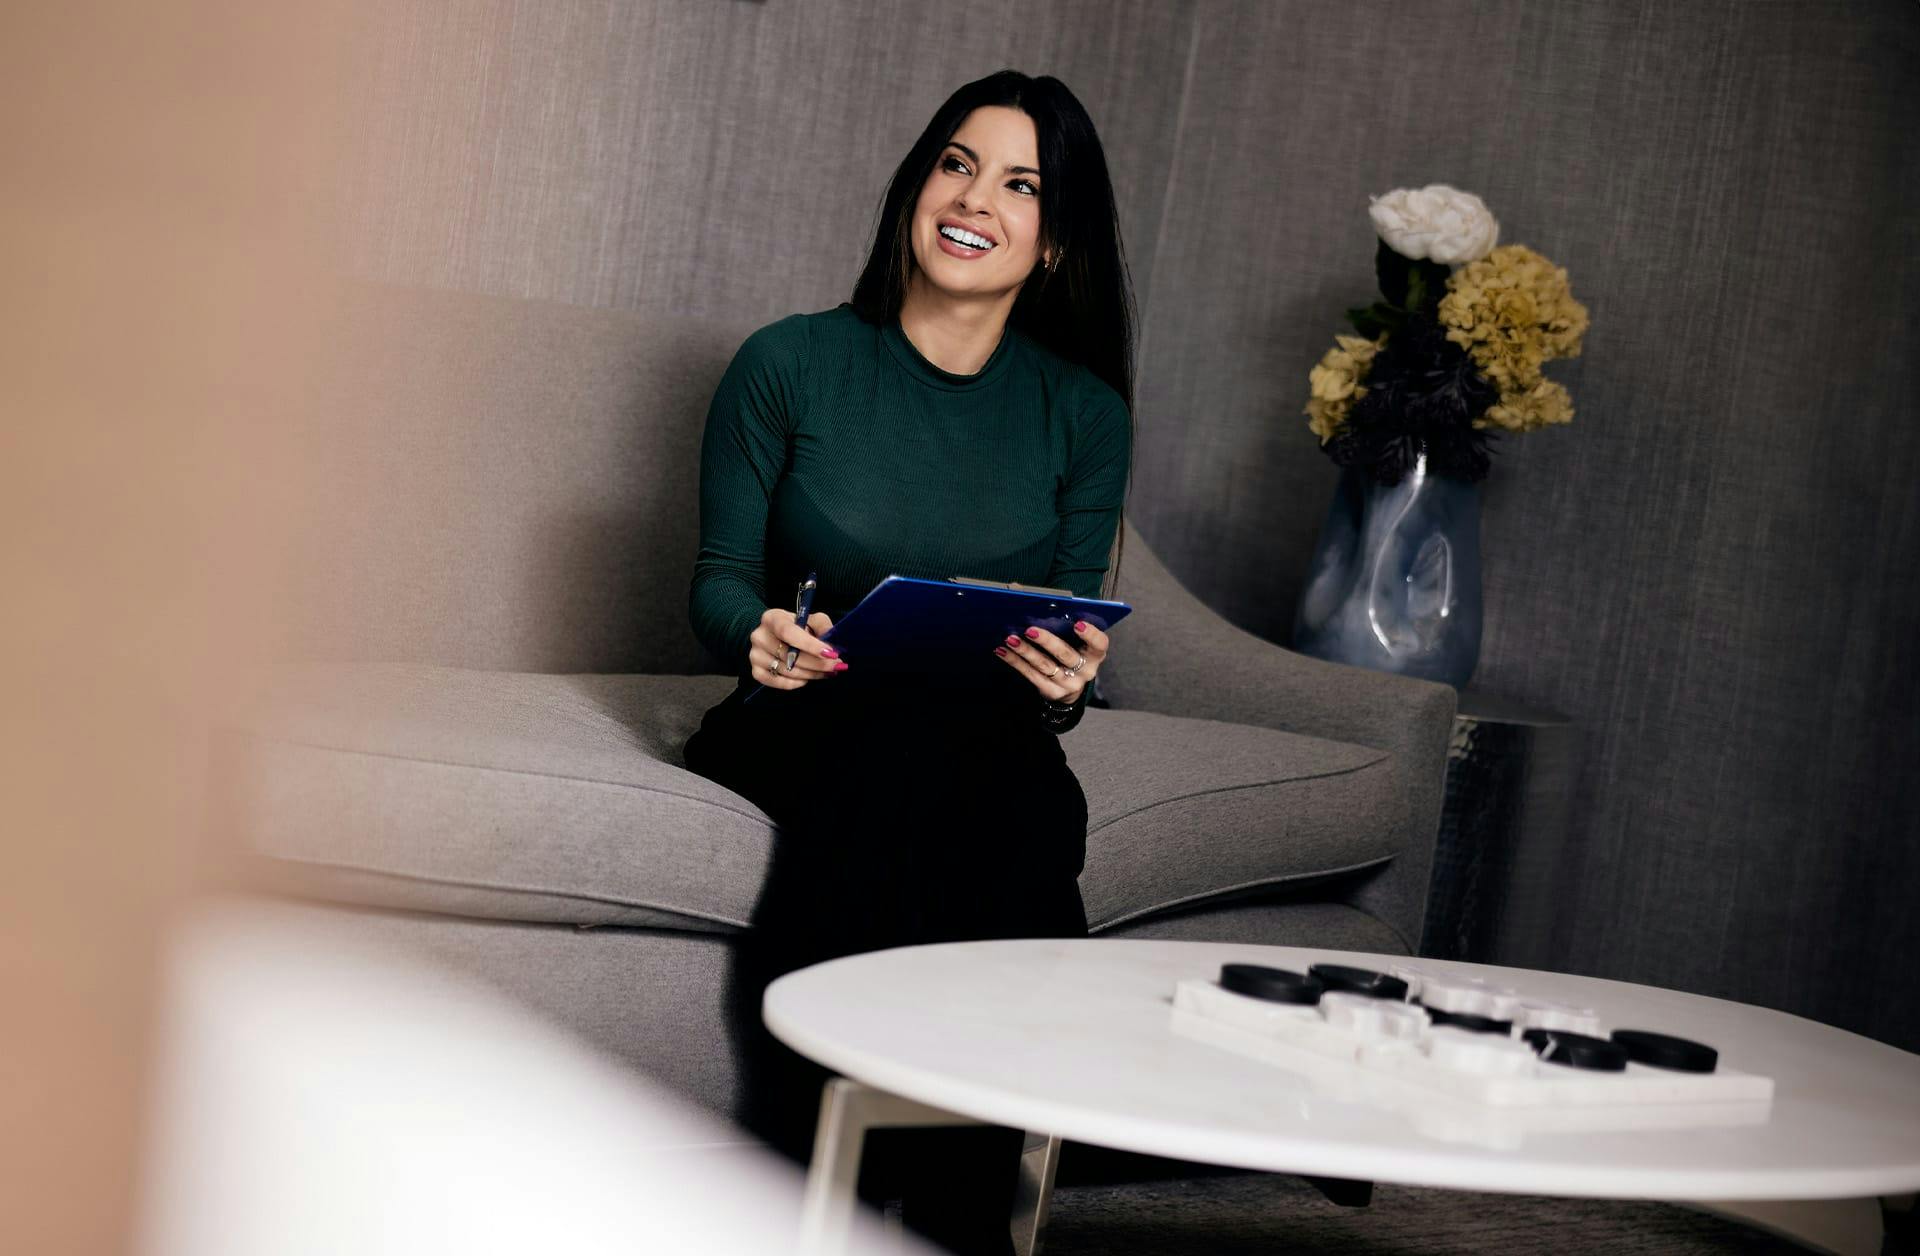 smiling woman sitting on a couch holding a tablet